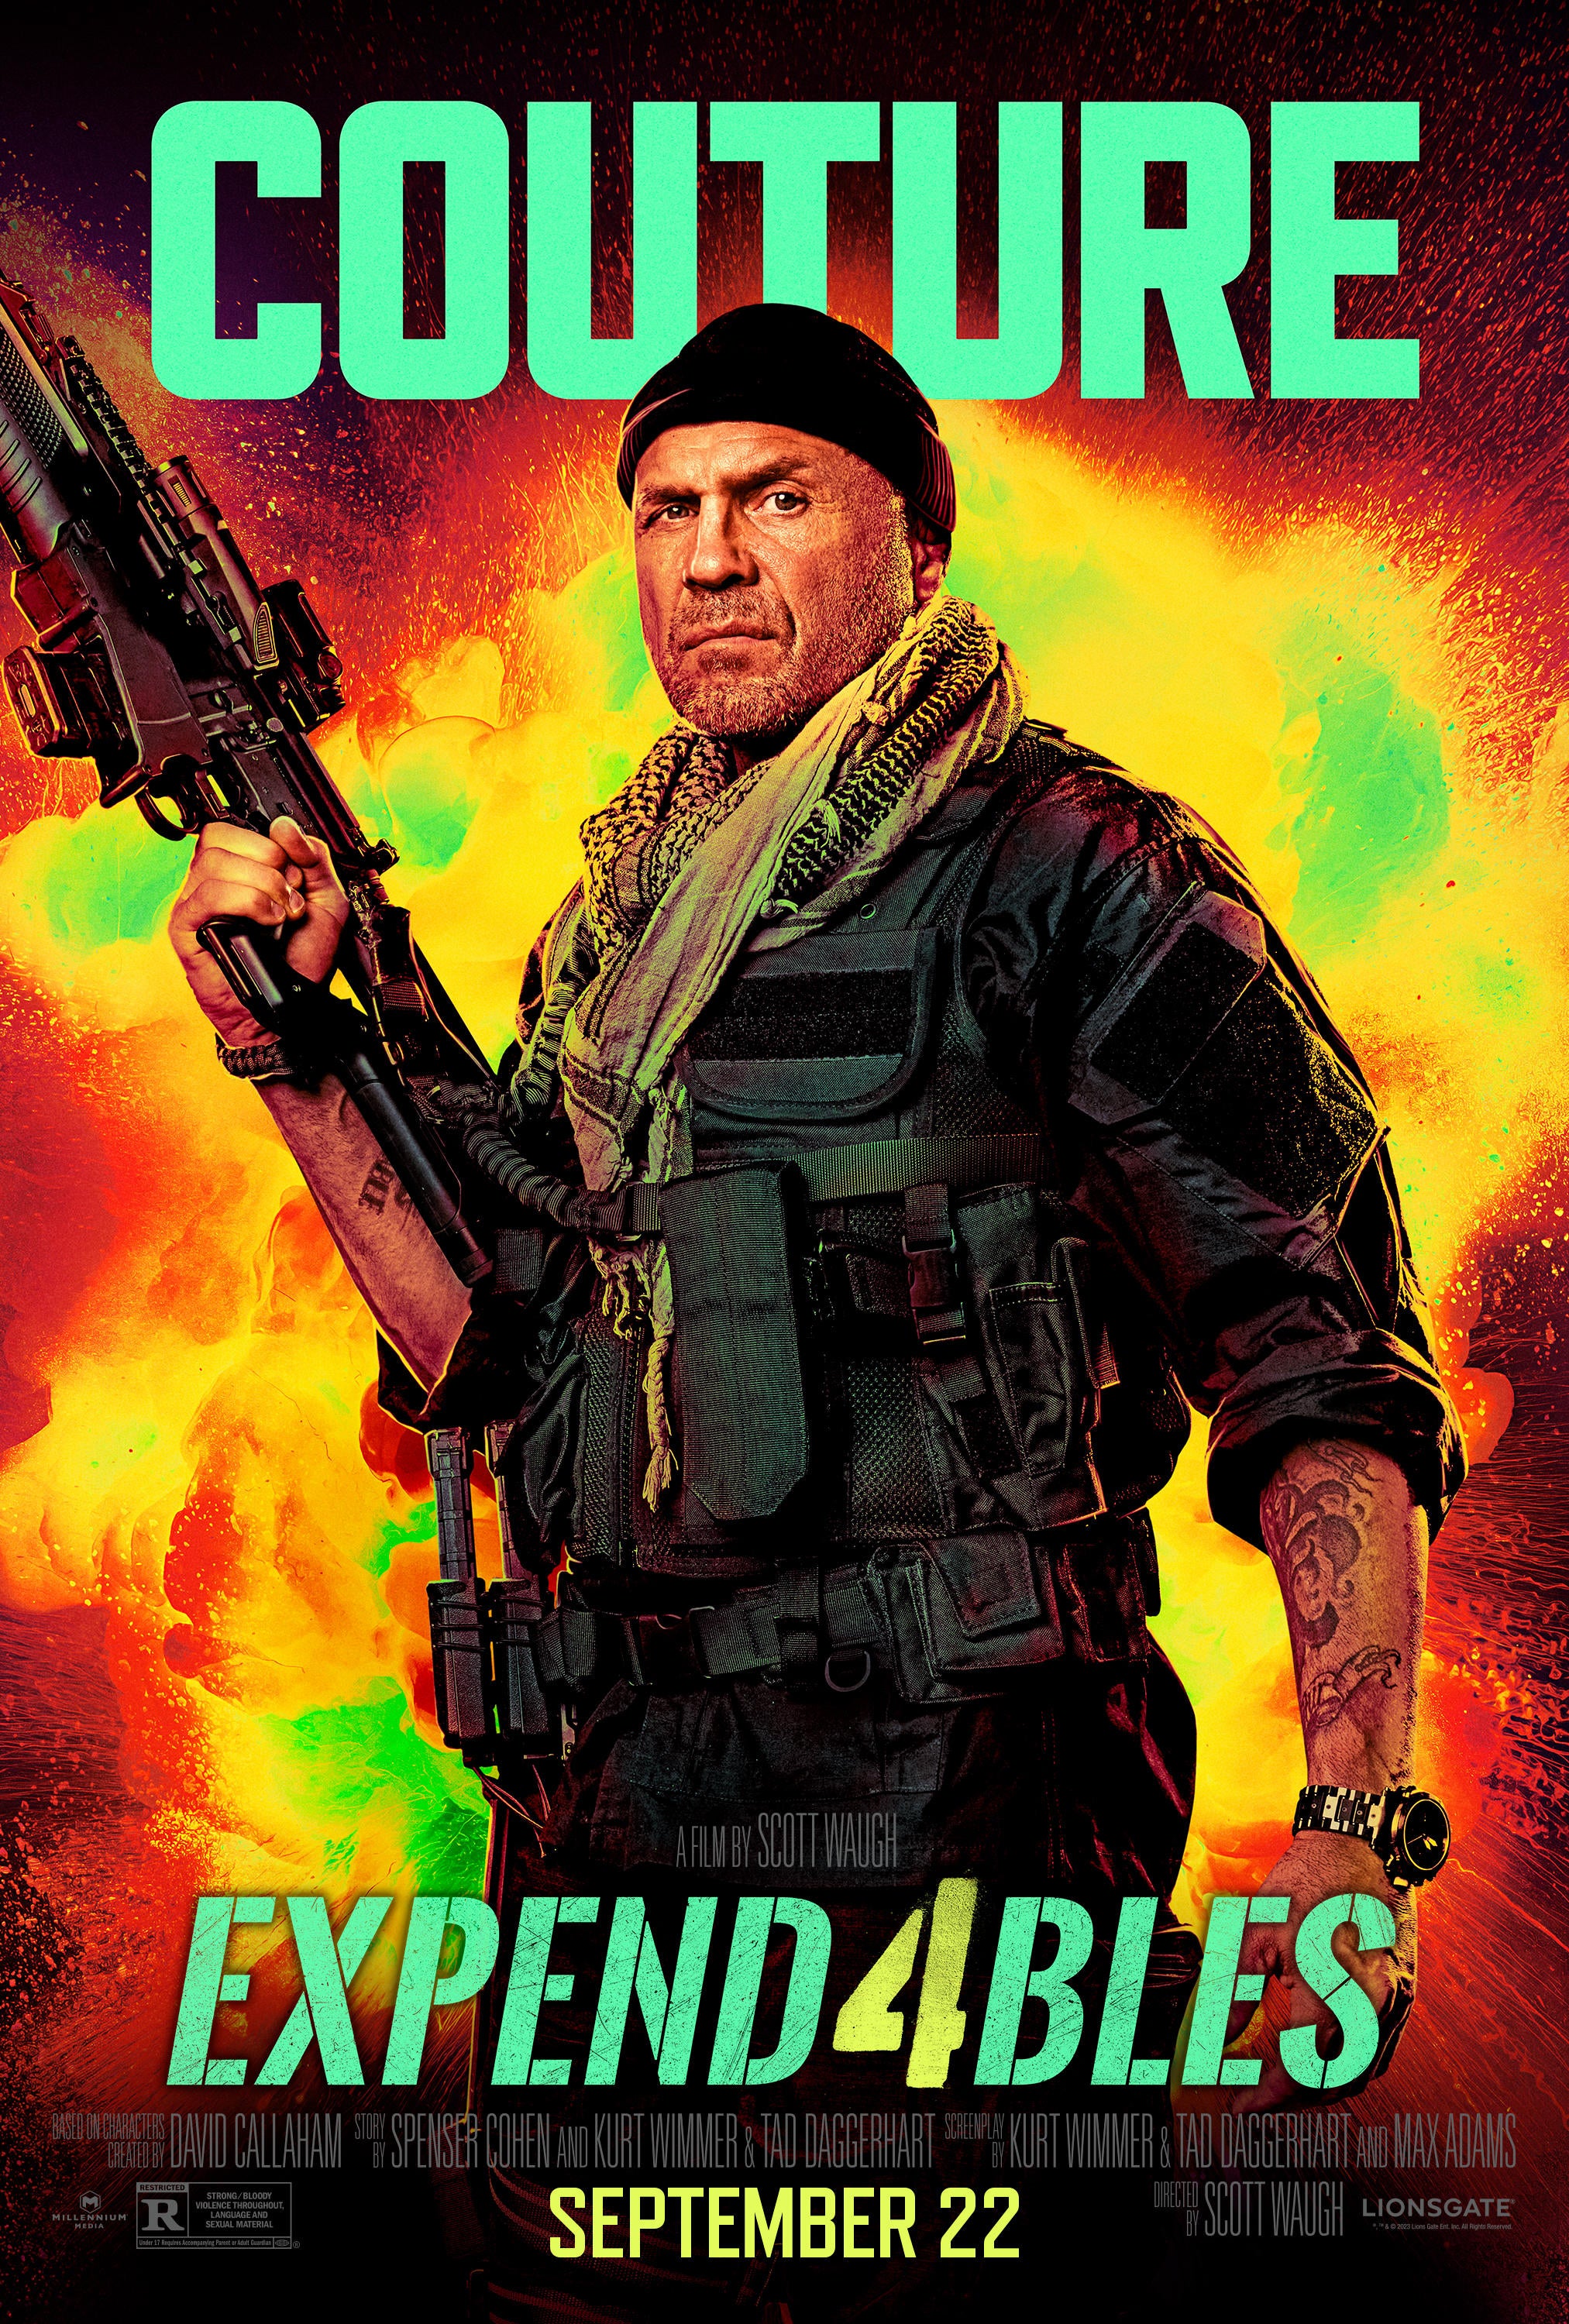 Los consumibles-4-póster-randy-couture.jpg